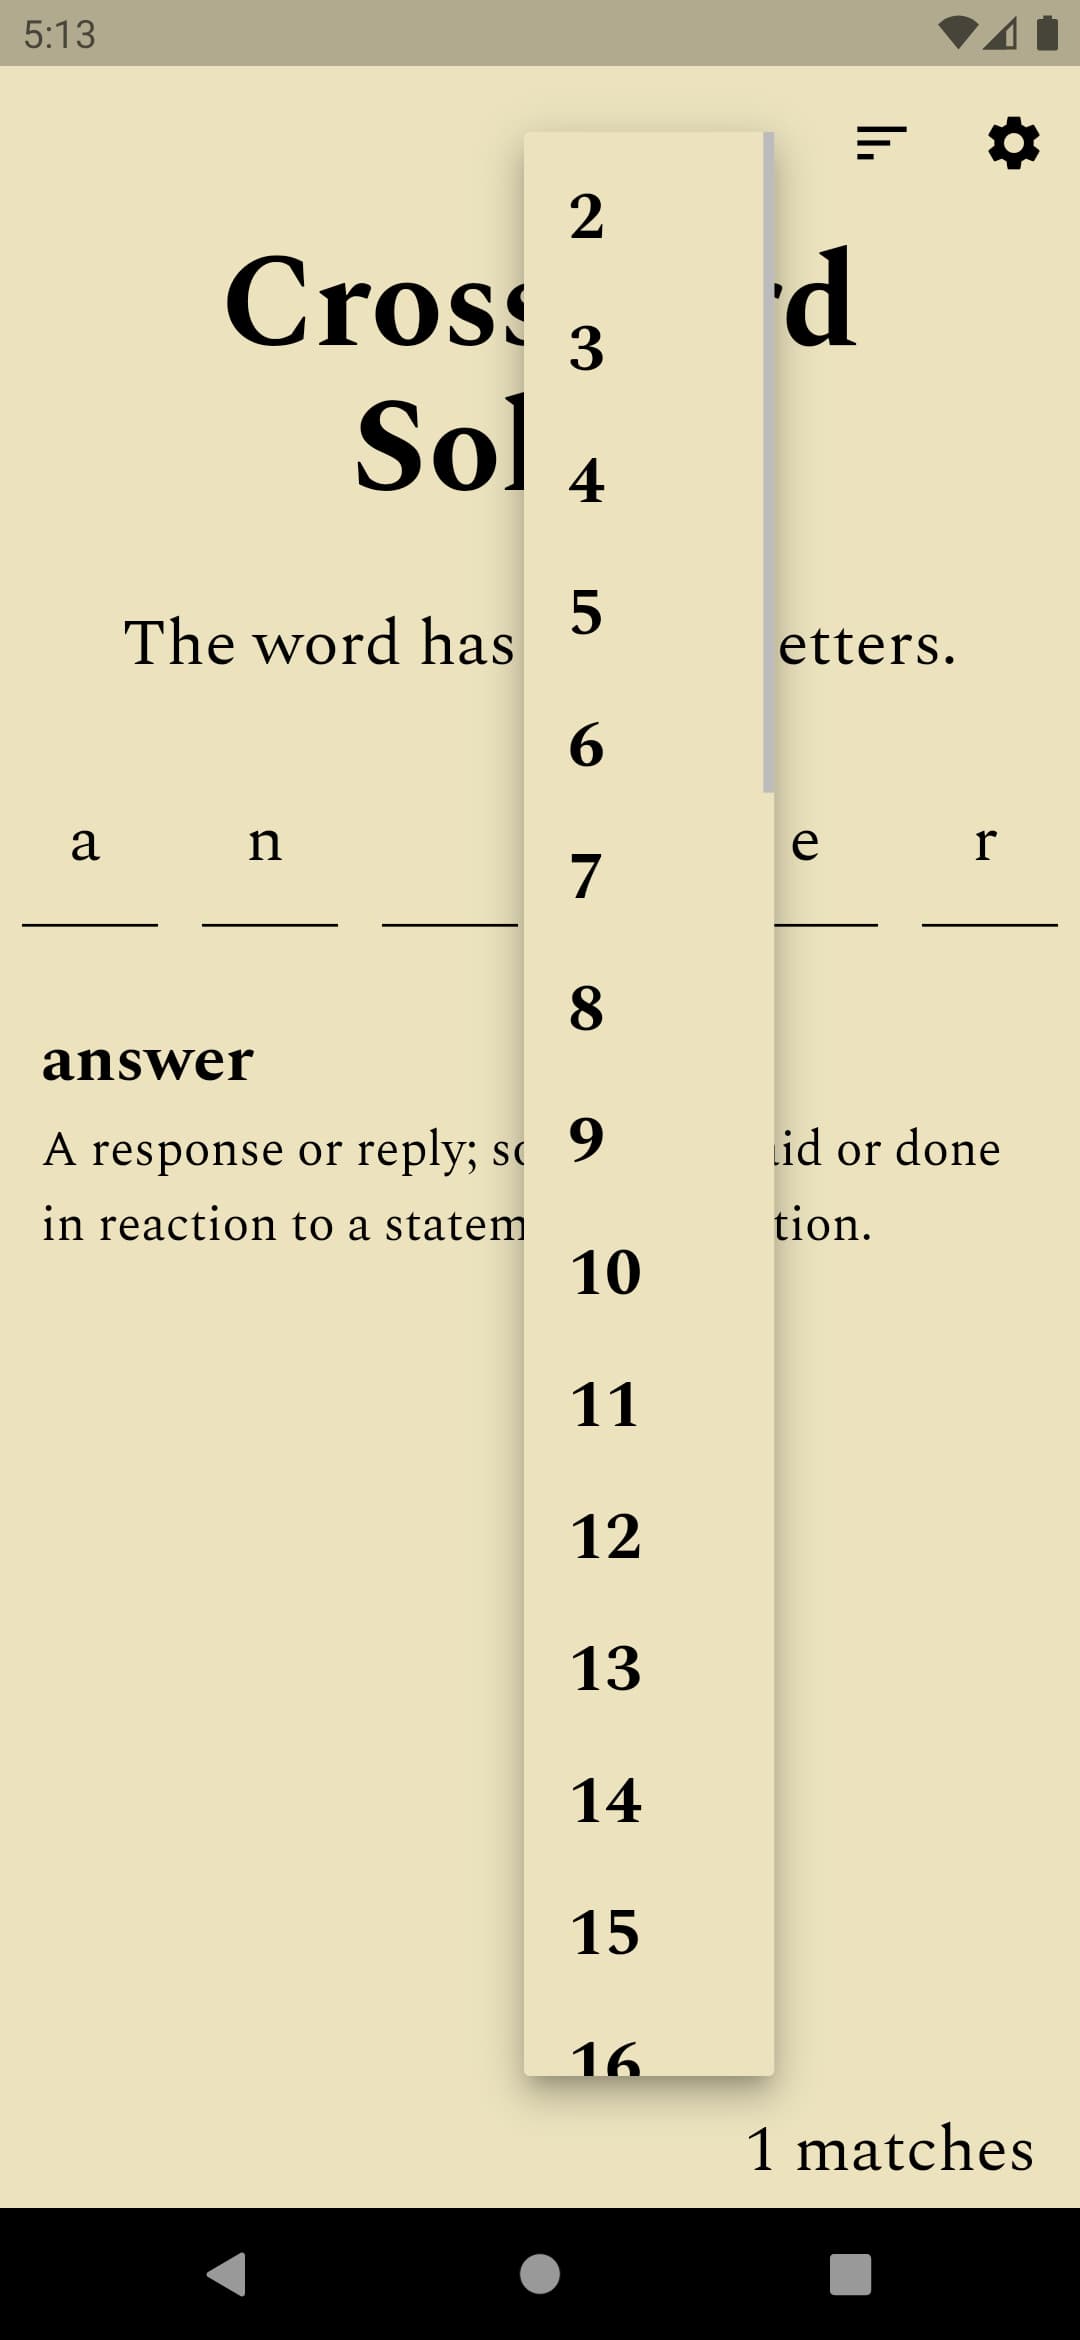 a screenshot of the app interface with the word length selector open